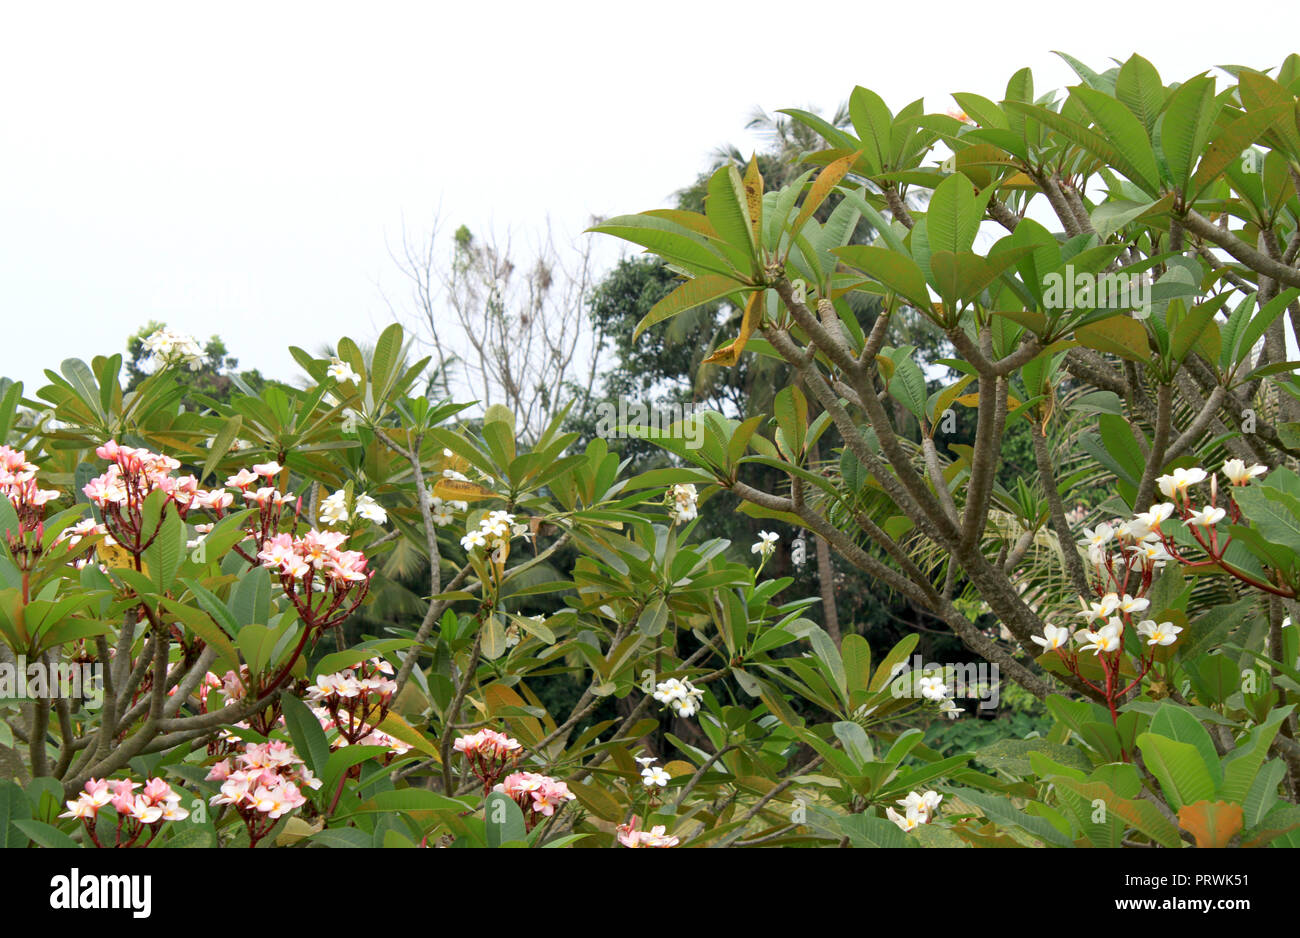 Lush plants, white and pink blooming oleander trees in Bangkok (Krung Thep), Thailand, Asia. Asian nature background. Stock Photo